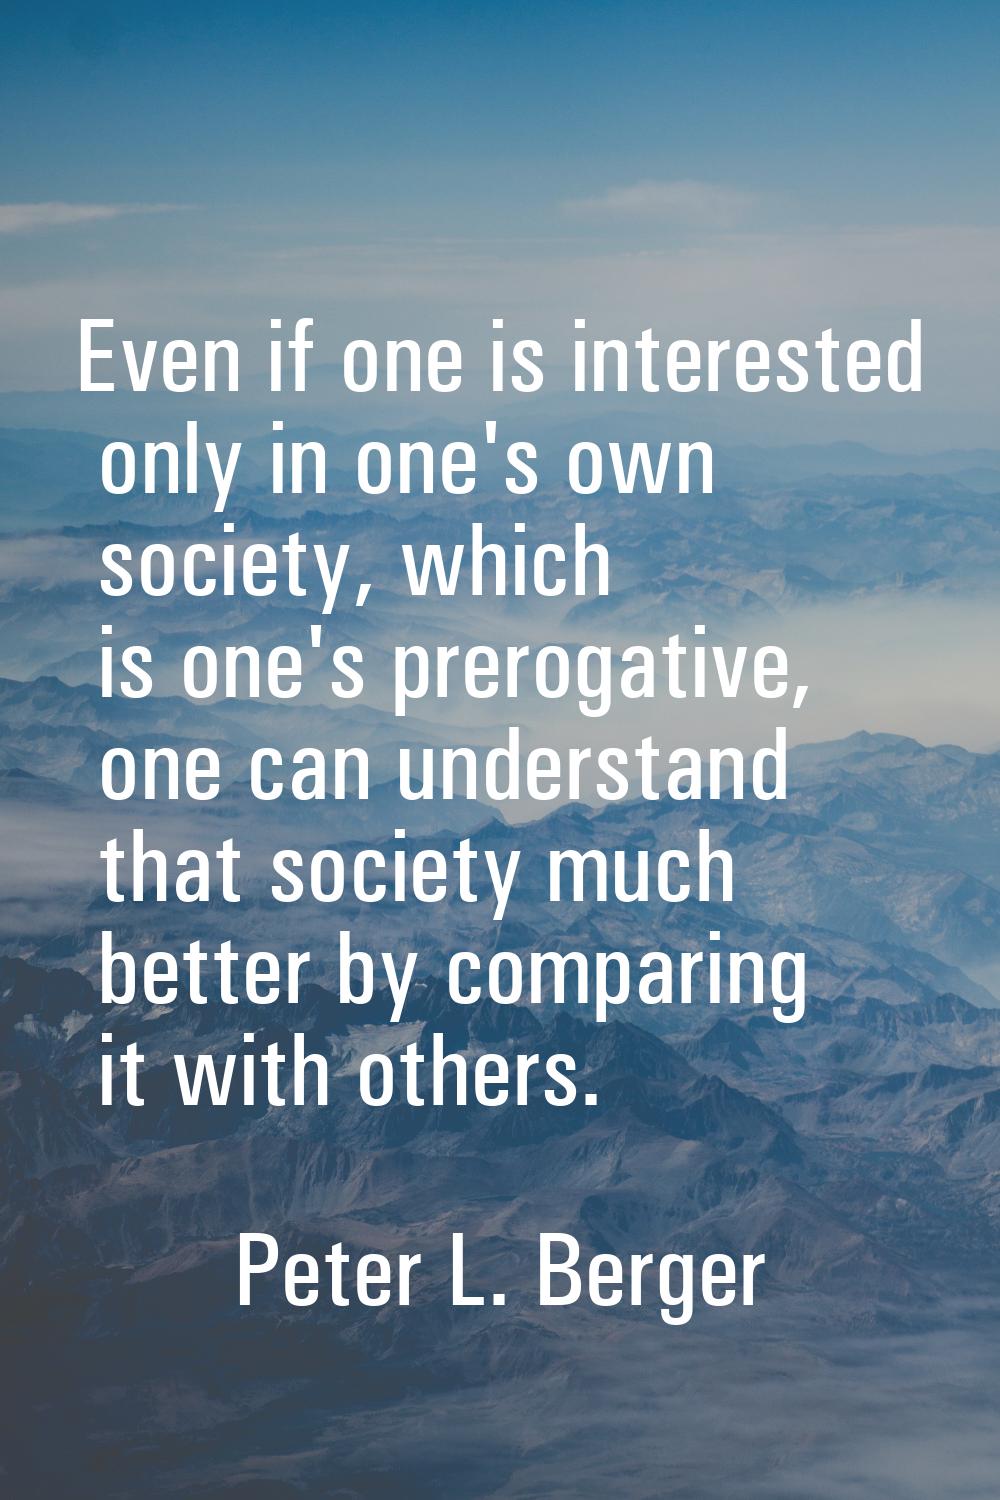 Even if one is interested only in one's own society, which is one's prerogative, one can understand